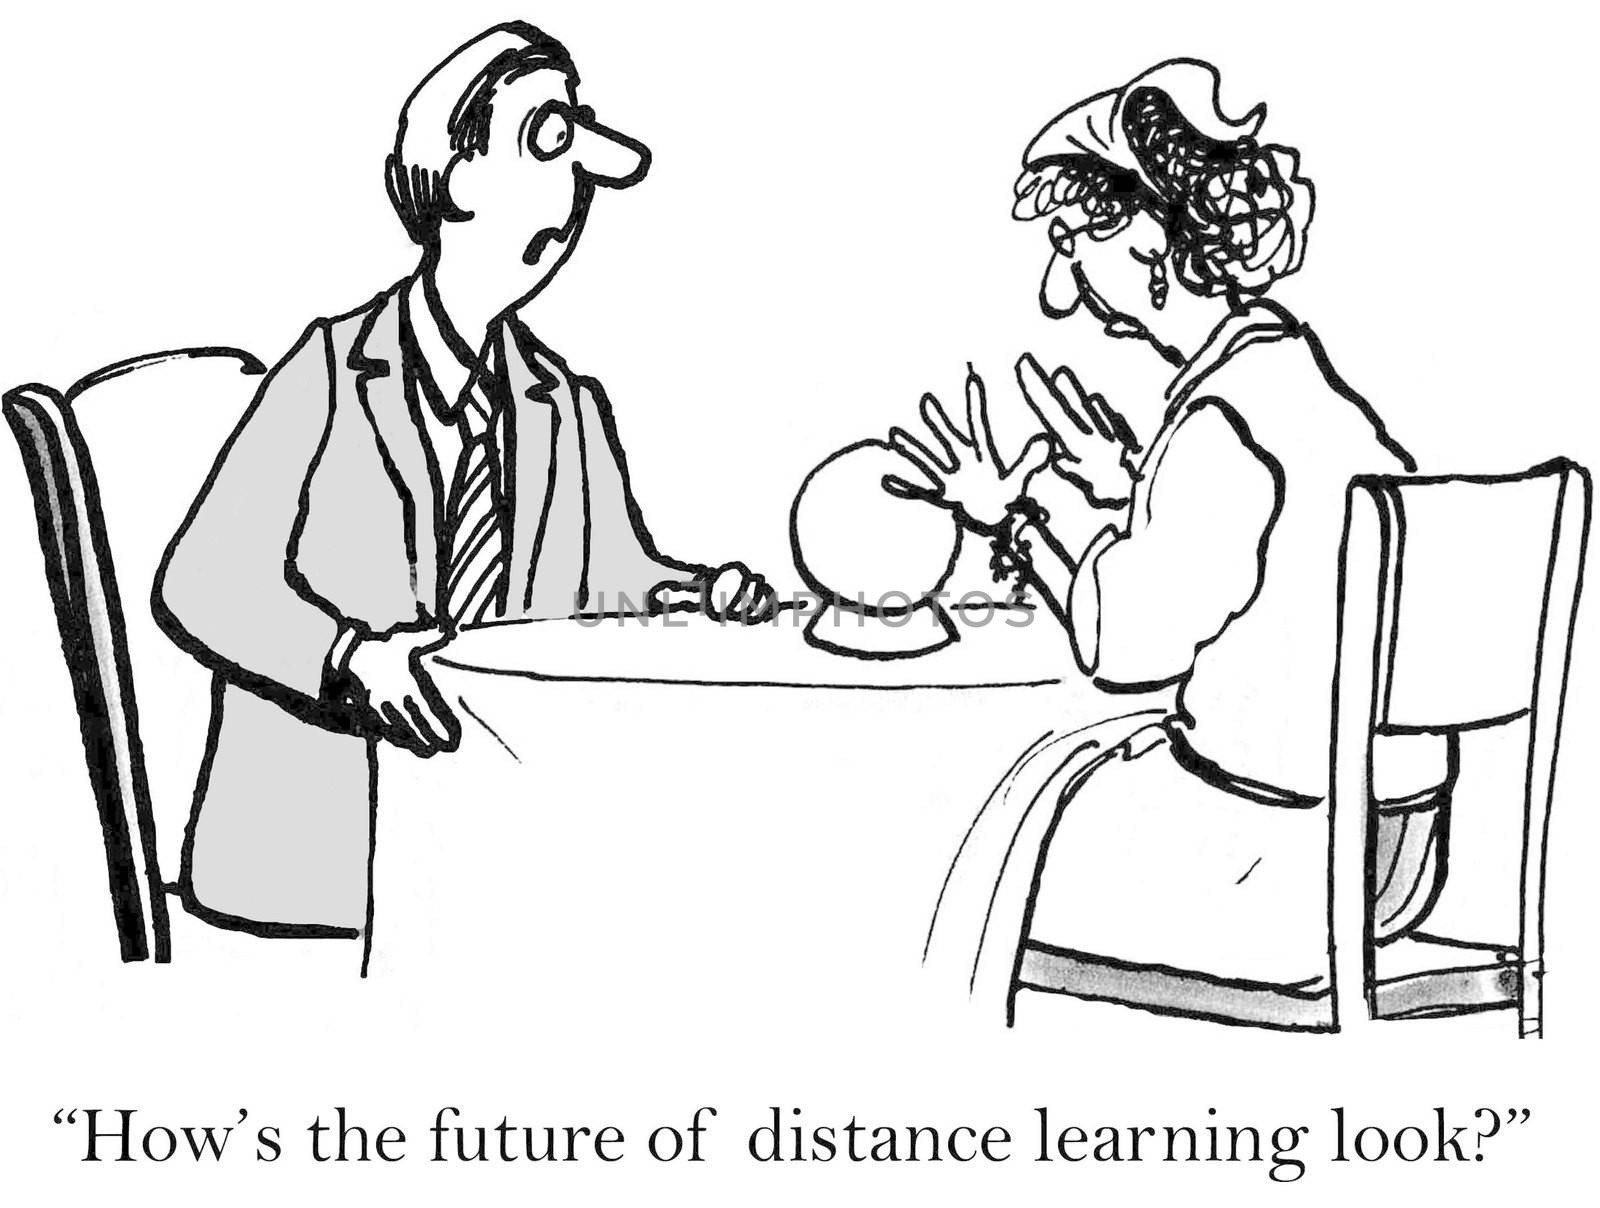 "How's the future of distance learning look?"